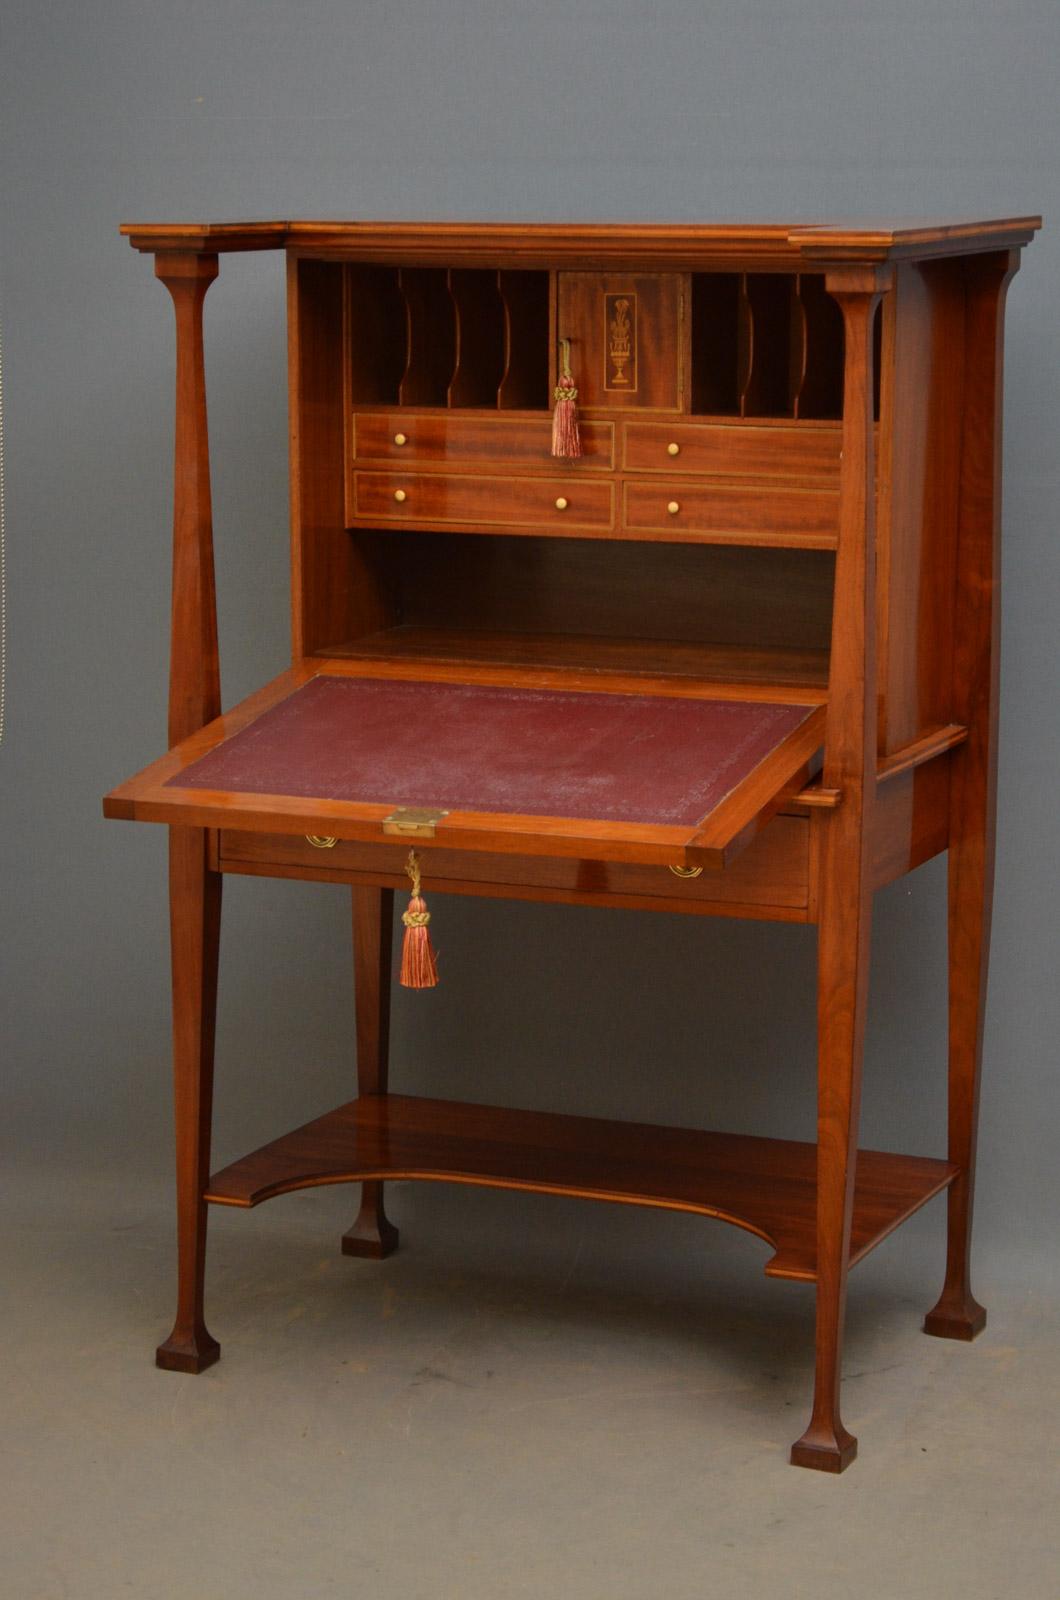 Sn3662, fine quality and very stylish Arts & Crafts bureau in the manner of Shapland and Petter, having three panels inlaid with Art Nouveau motifs, the interior having small cupboard, pigeon holes, small drawers and maroon leather writing surface